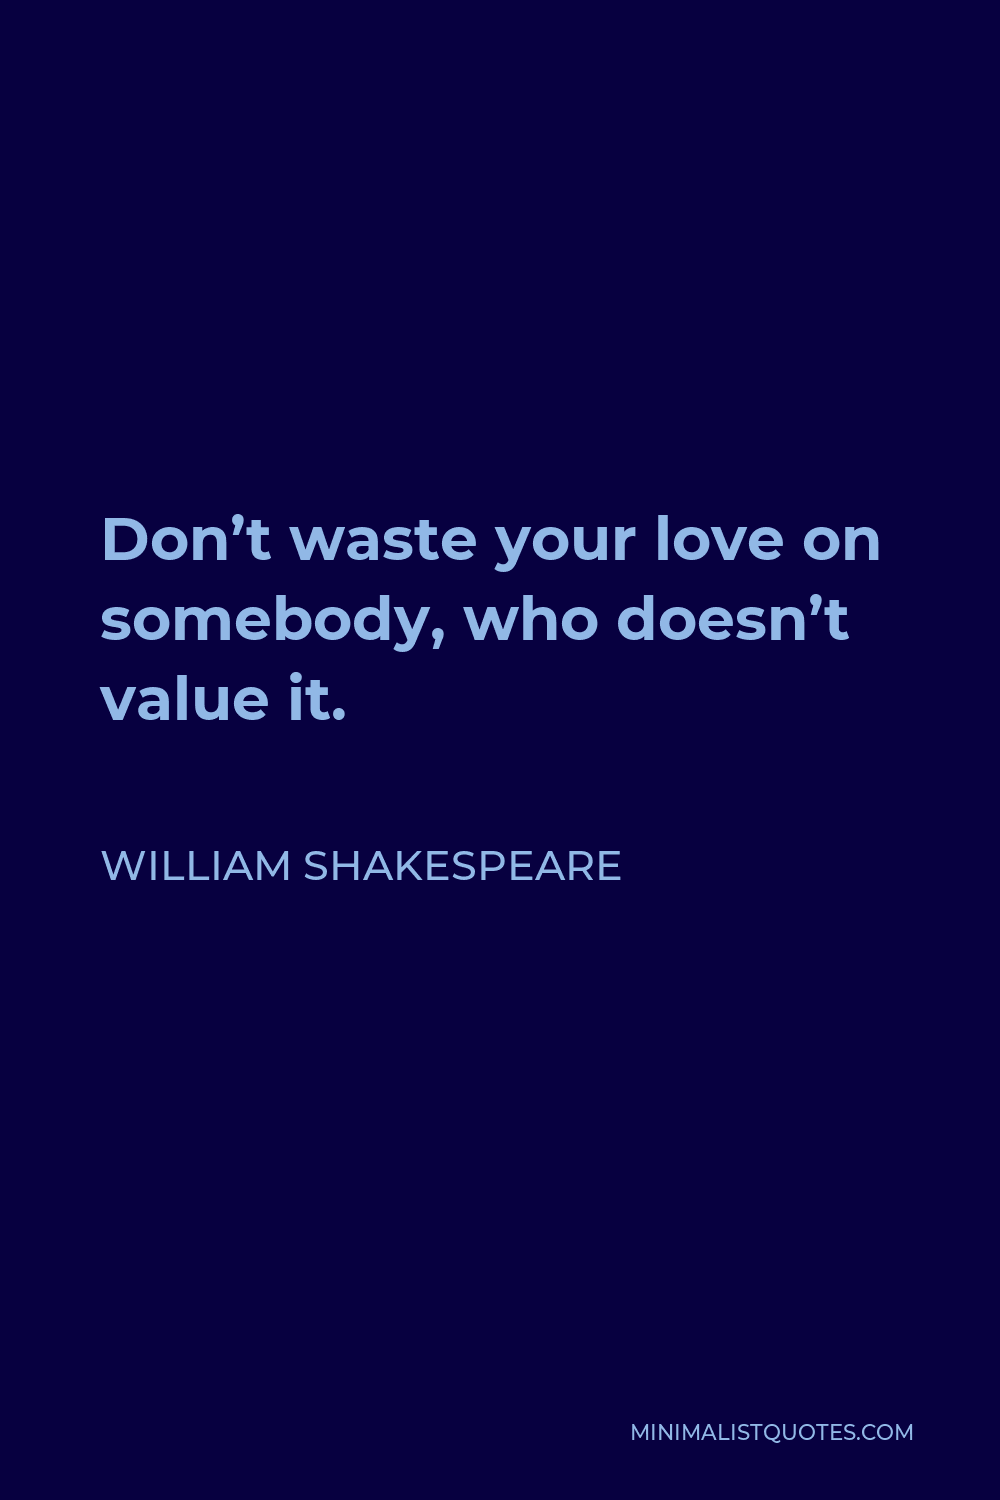 William Shakespeare Quote - Don’t waste your love on somebody, who doesn’t value it.